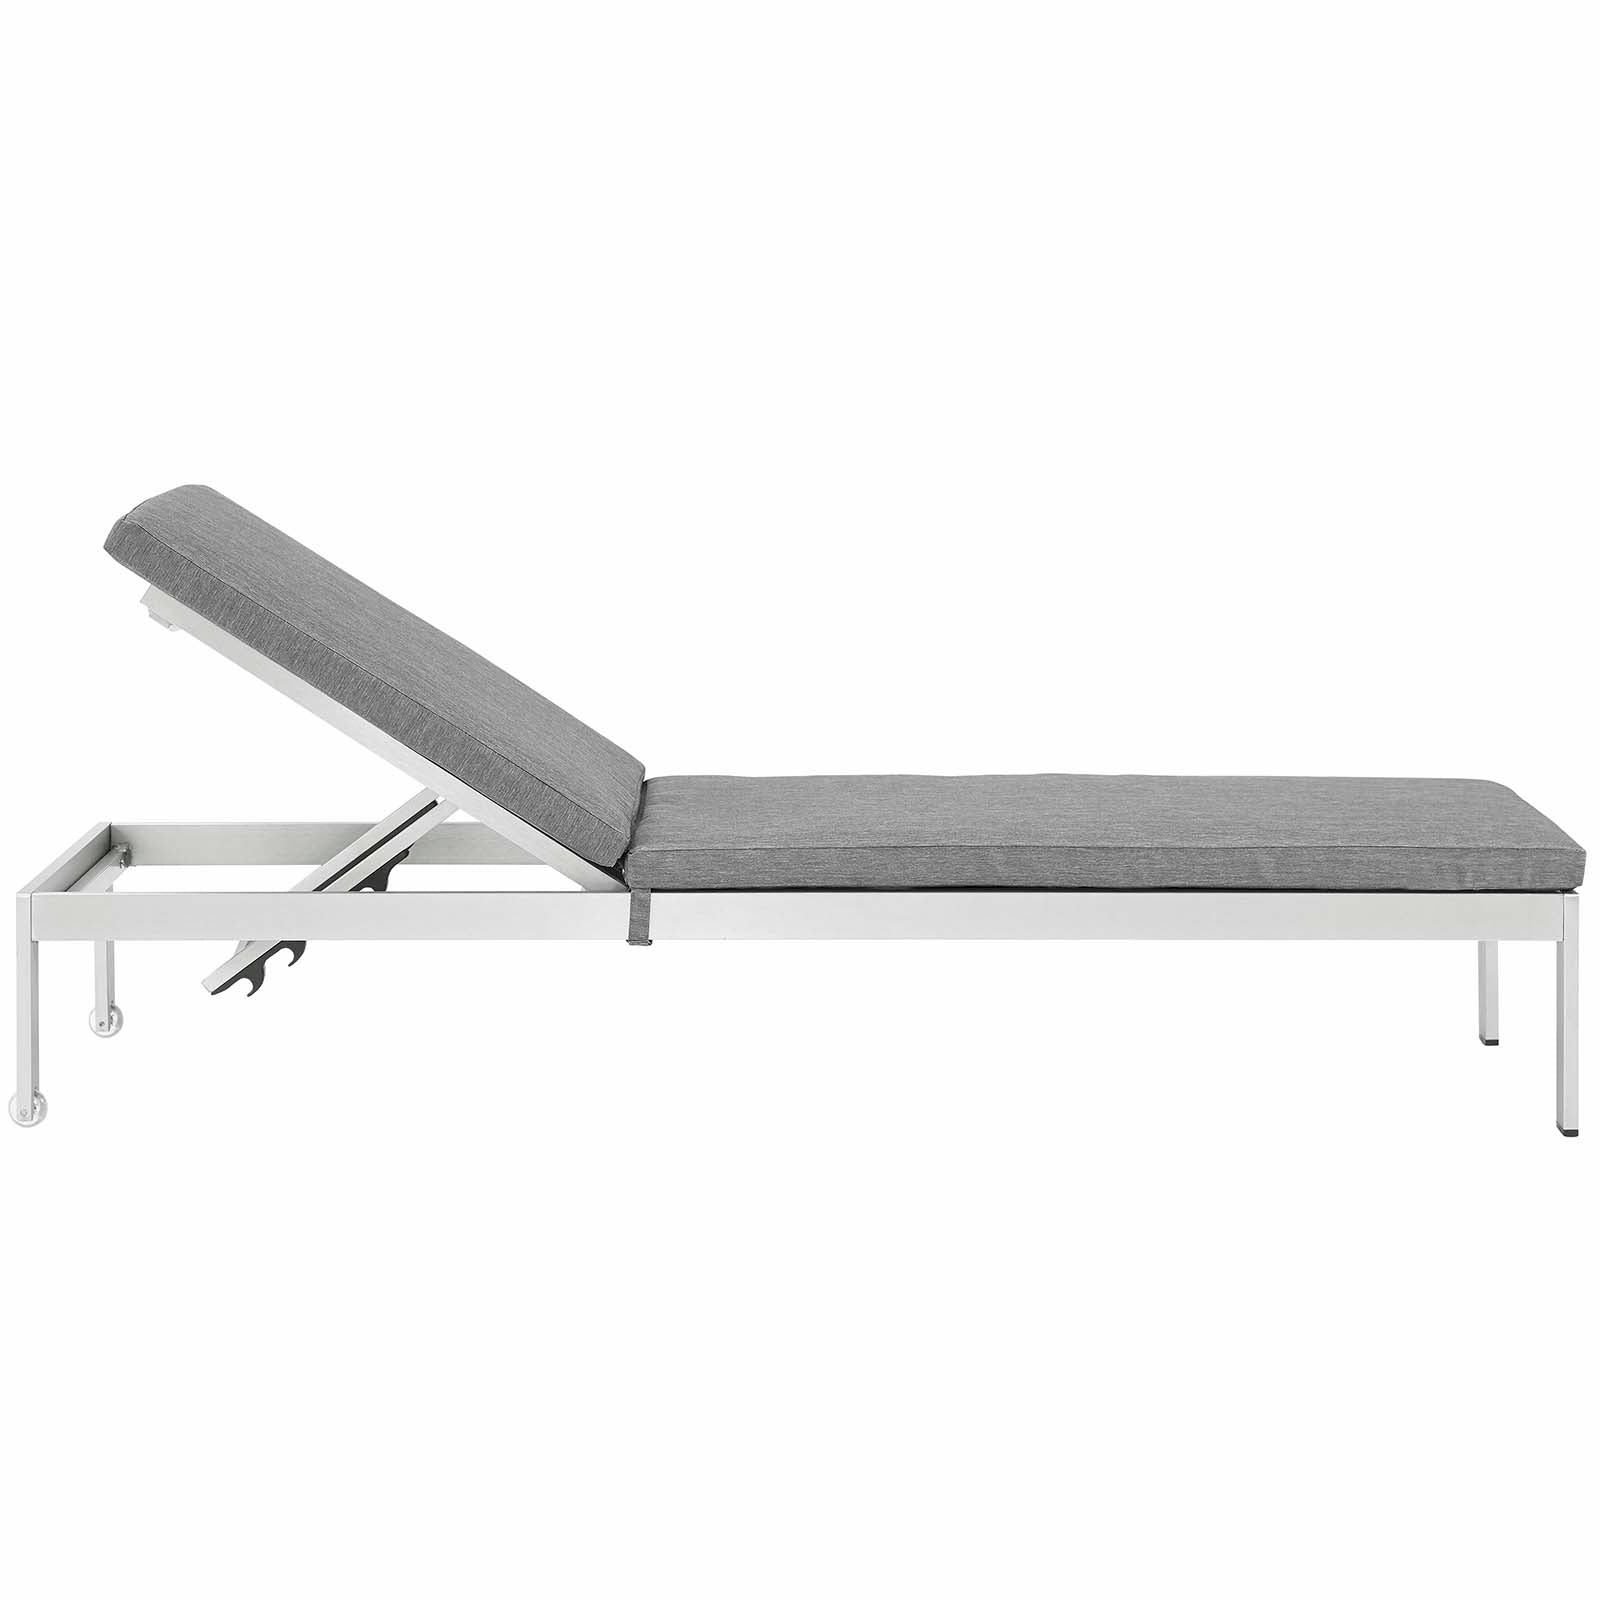 Shore Chaise with Cushions Outdoor Patio Aluminum Set of 4 - East Shore Modern Home Furnishings